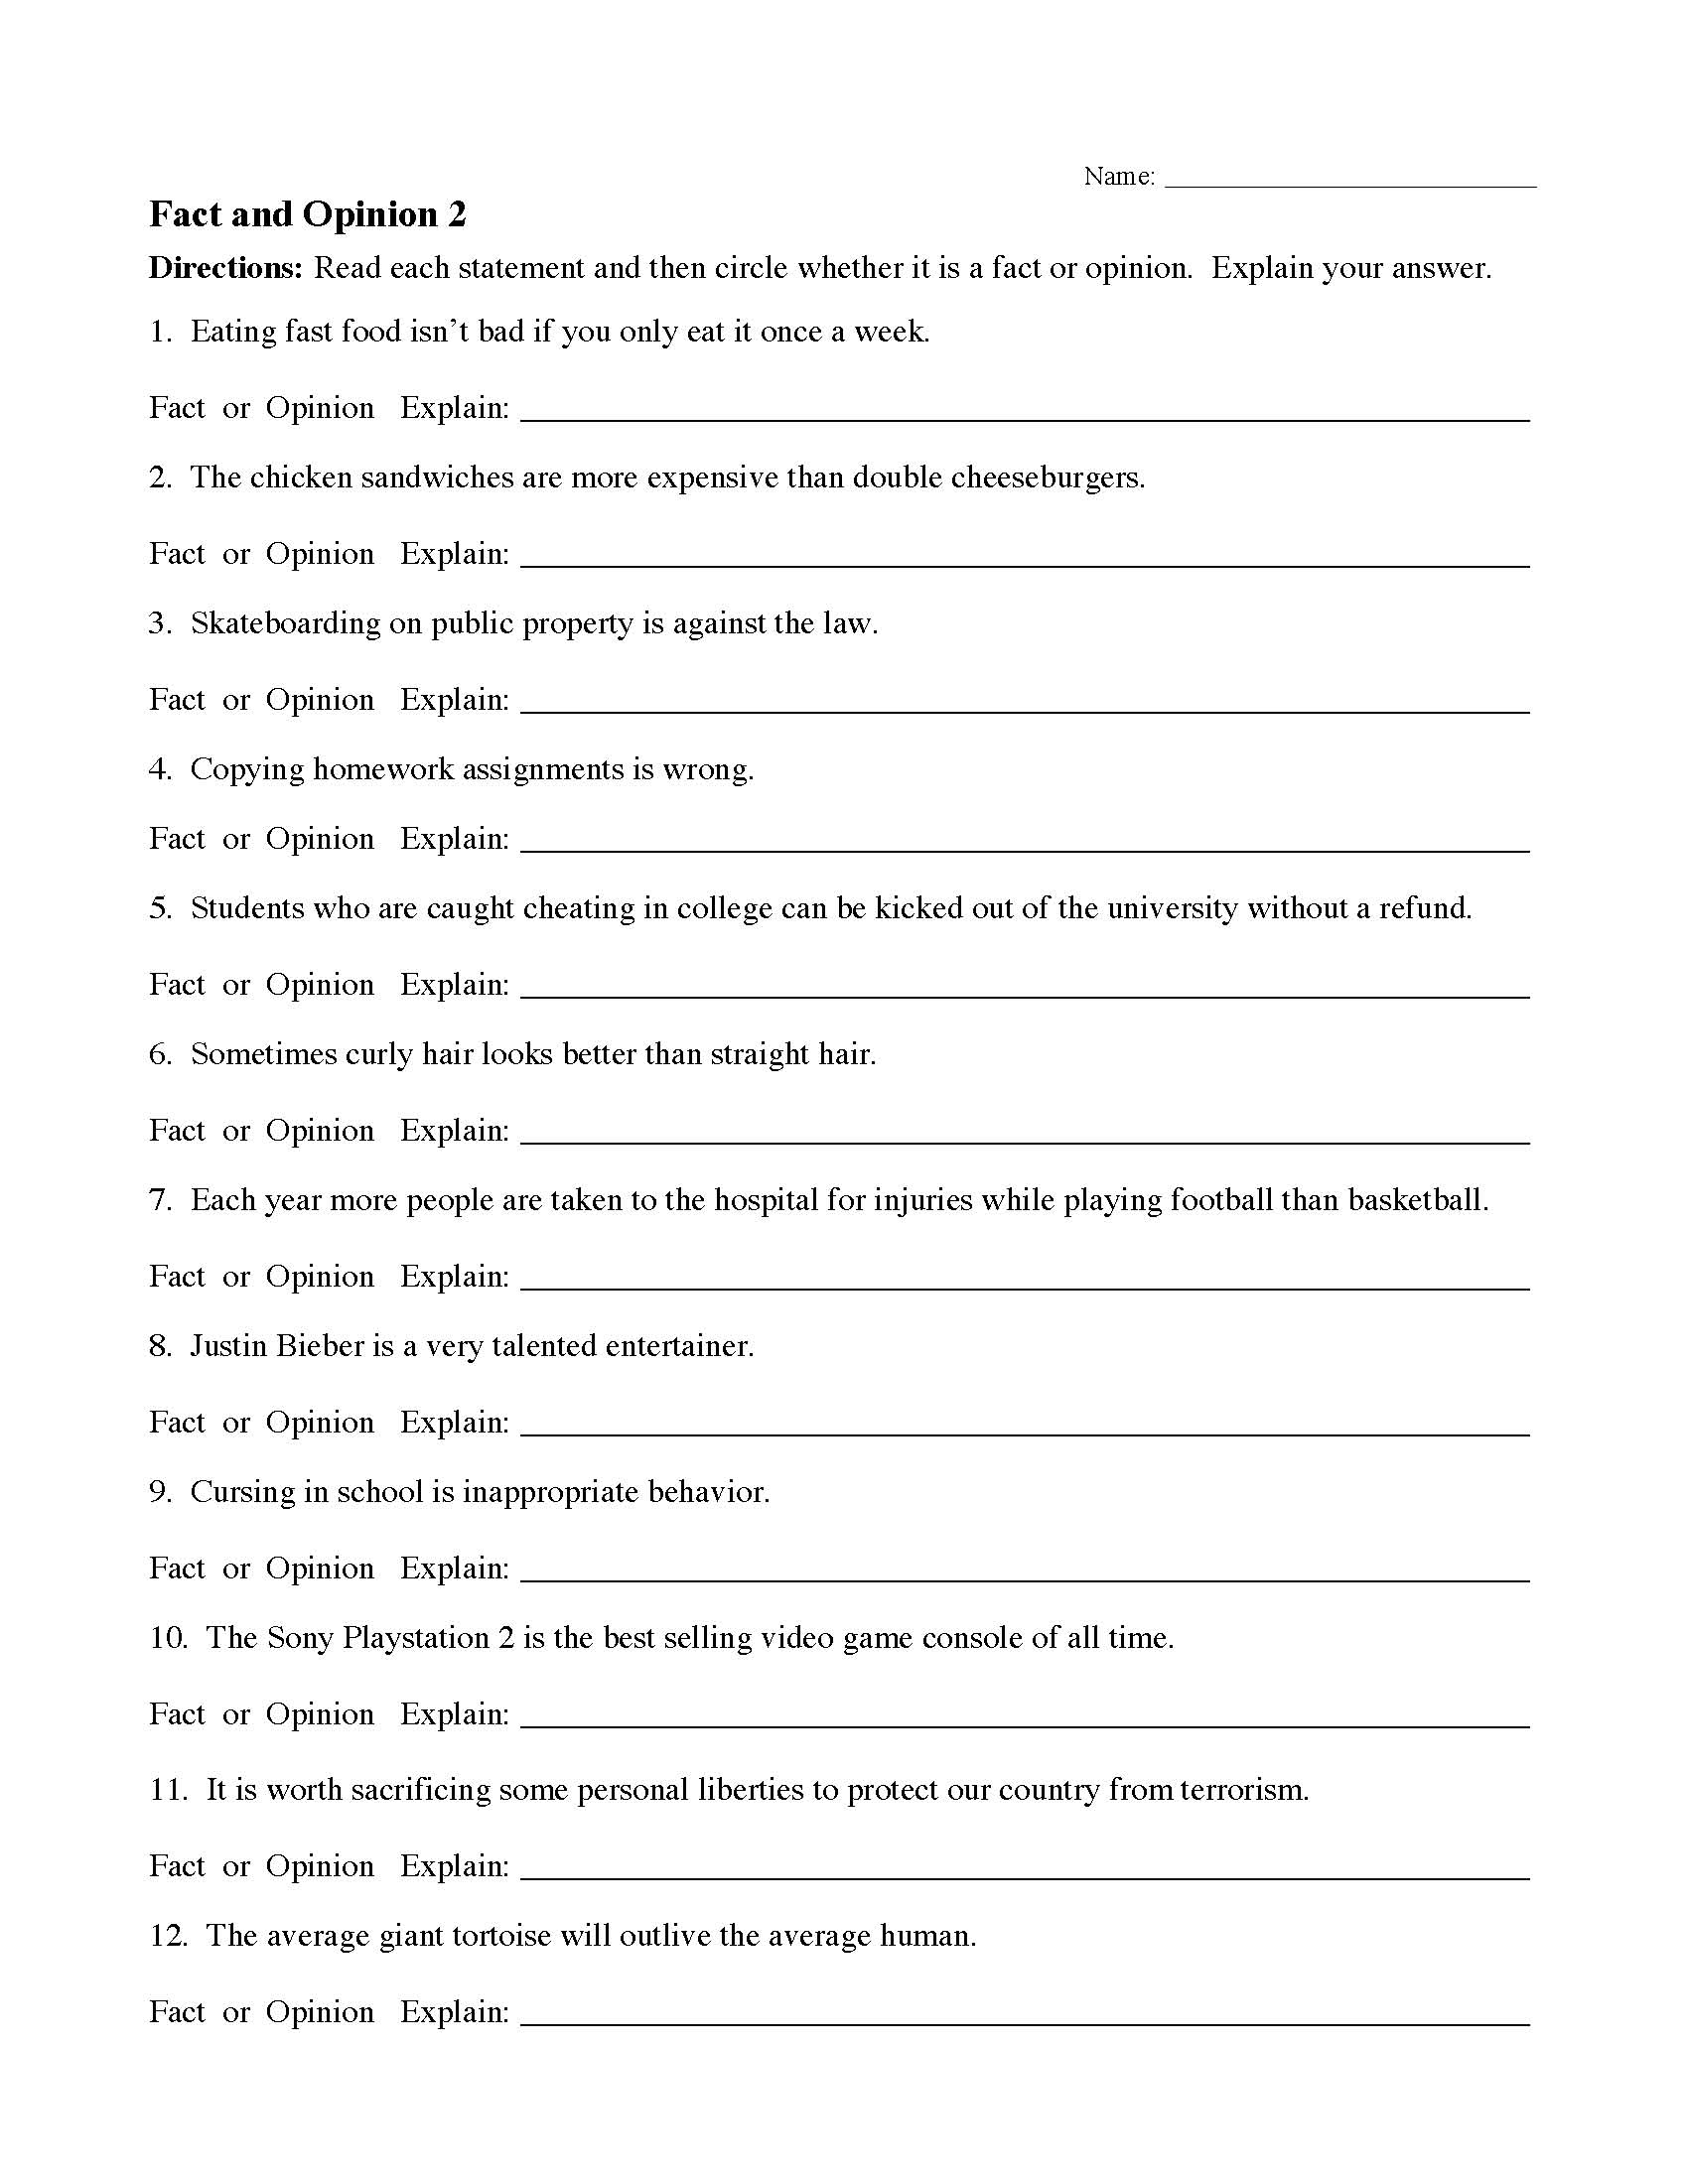 This is a preview image of Fact and Opinion Worksheet 2. Click on it to enlarge it or view the source file.